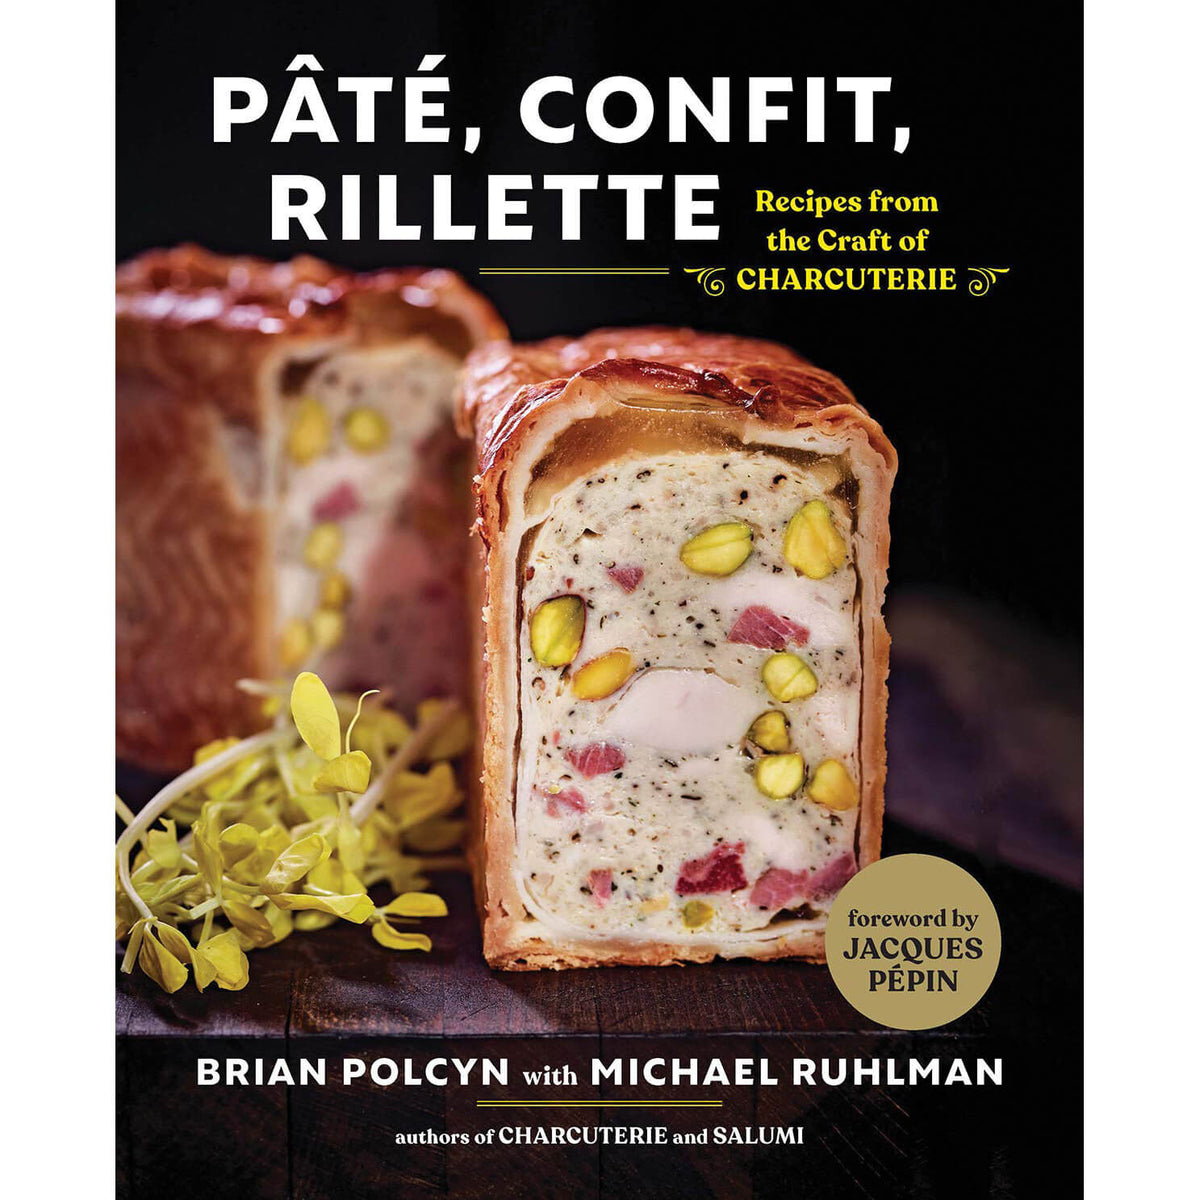 Pate, Confit, Rillette: Recipes from the Craft of Charcuterie front cover.